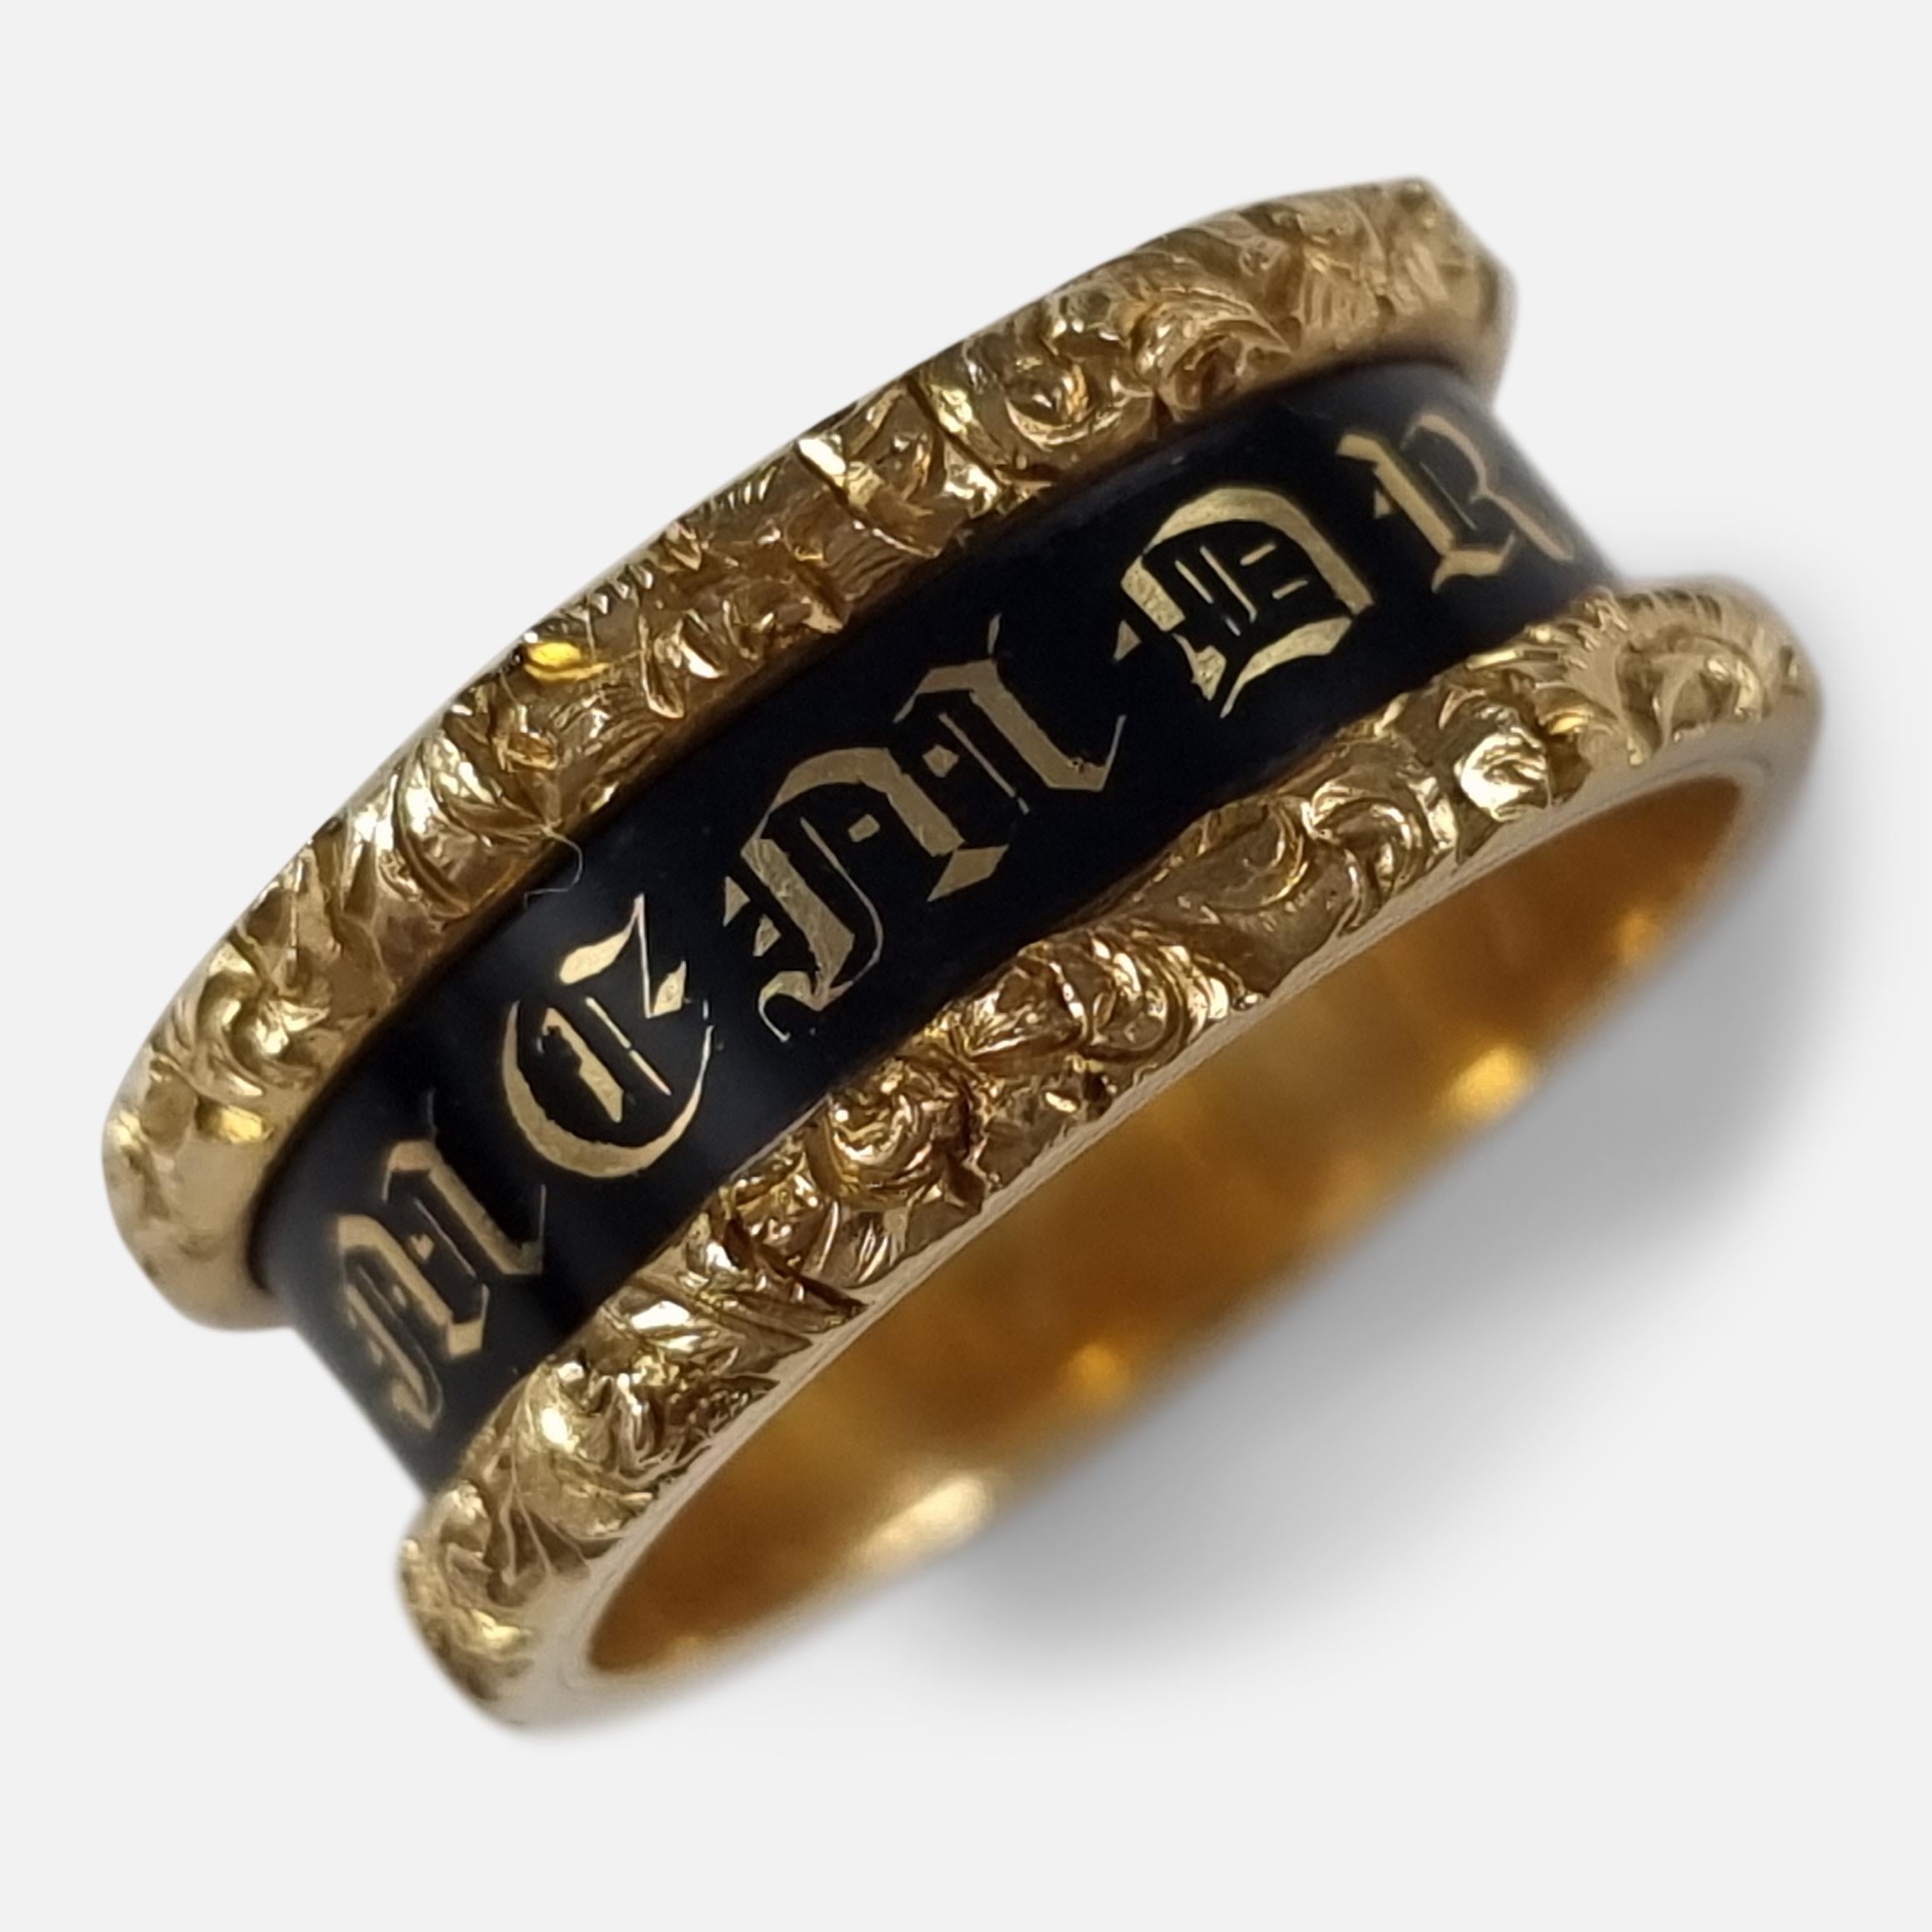 A William IV 18ct yellow gold and black enamel memorial mourning ring.

The band reads 'IN MEMORY OF' within gold foliate border, and is inscribed to the interior 'Owen Rees, Esq Ob 5 Sep 1837, Aet 67.'.

The ring is hallmarked with London marks,